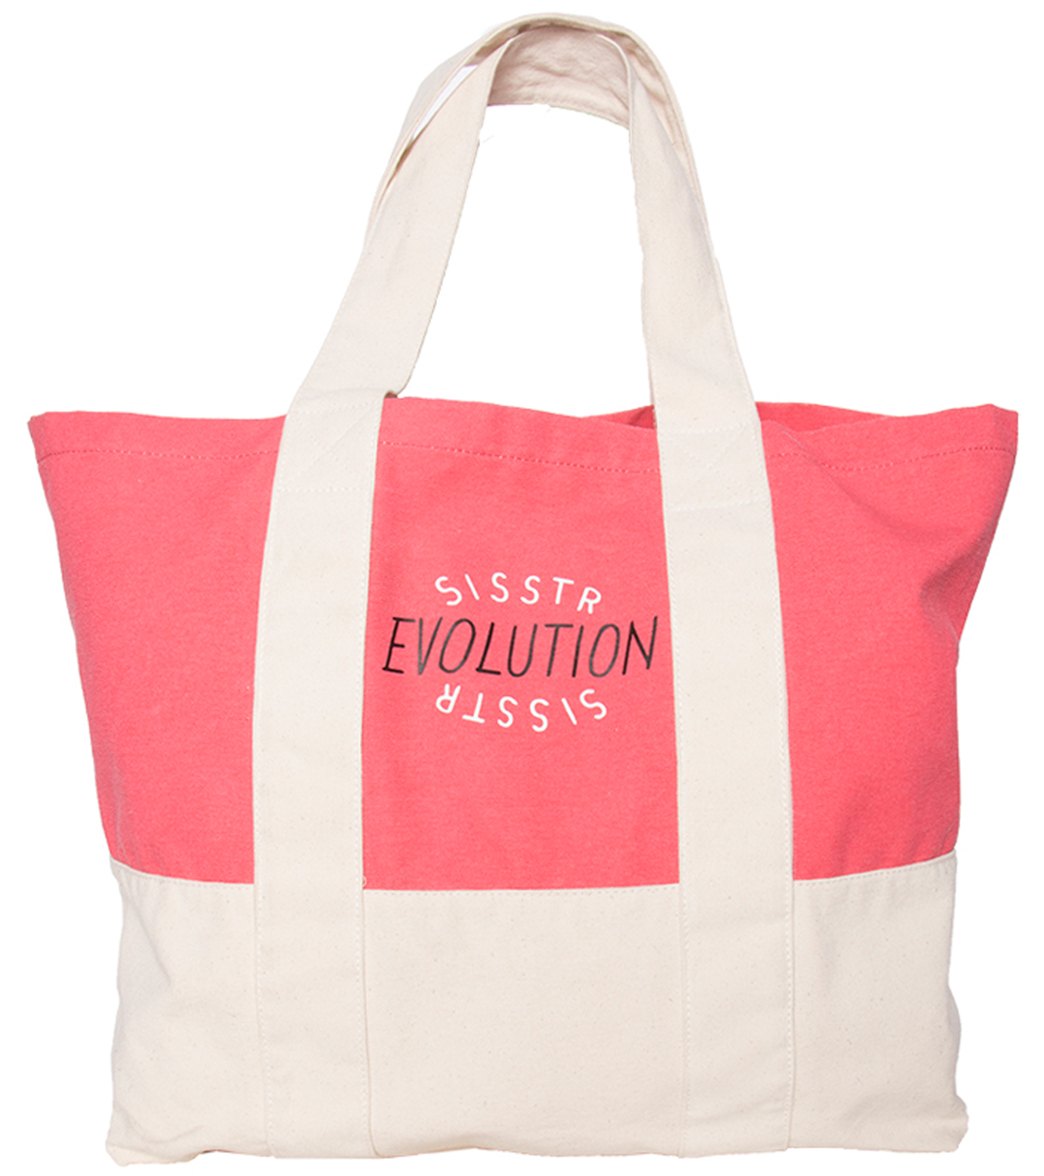 Sisstrevolution All Day Tot'n Bag - Lily Pink Cotton - Swimoutlet.com